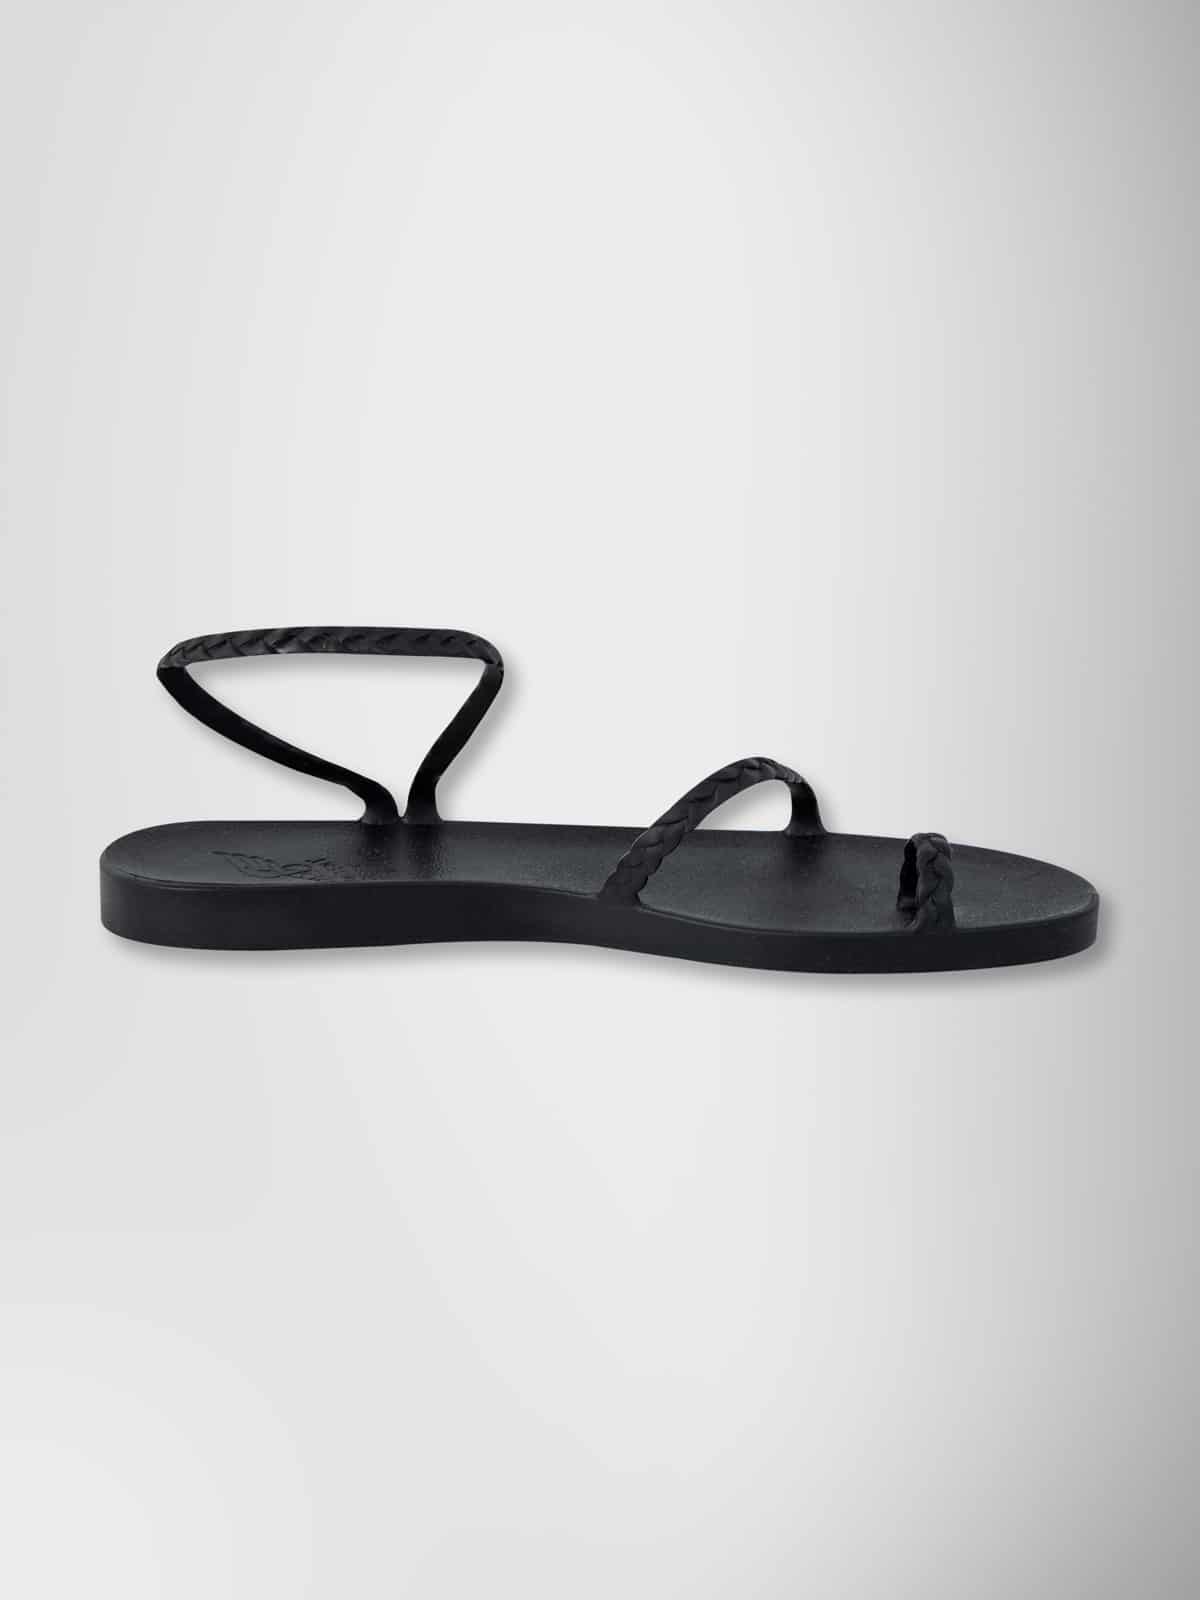 SANDALS "ELEFTHERIA" WITH GLITTERY RUBBER MATERIAL